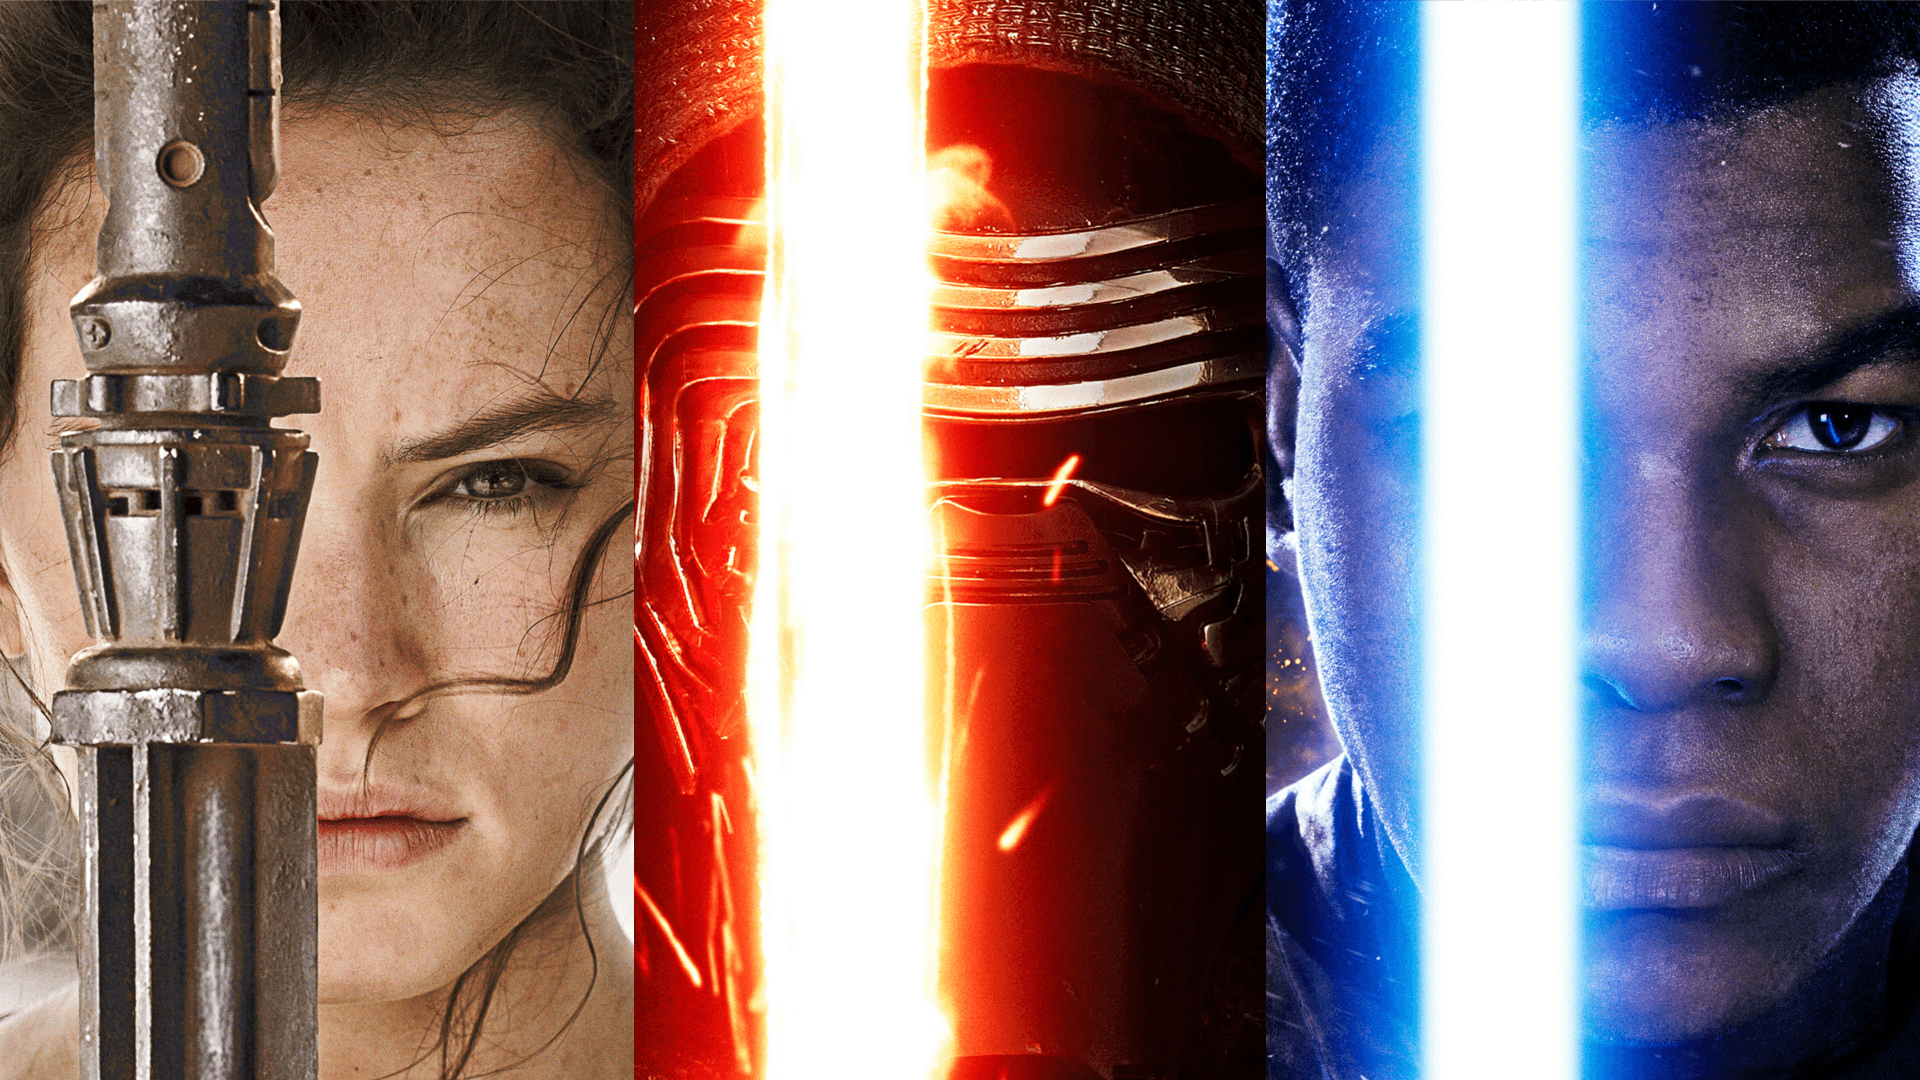 Made a wallpaper out of the new Star Wars posters